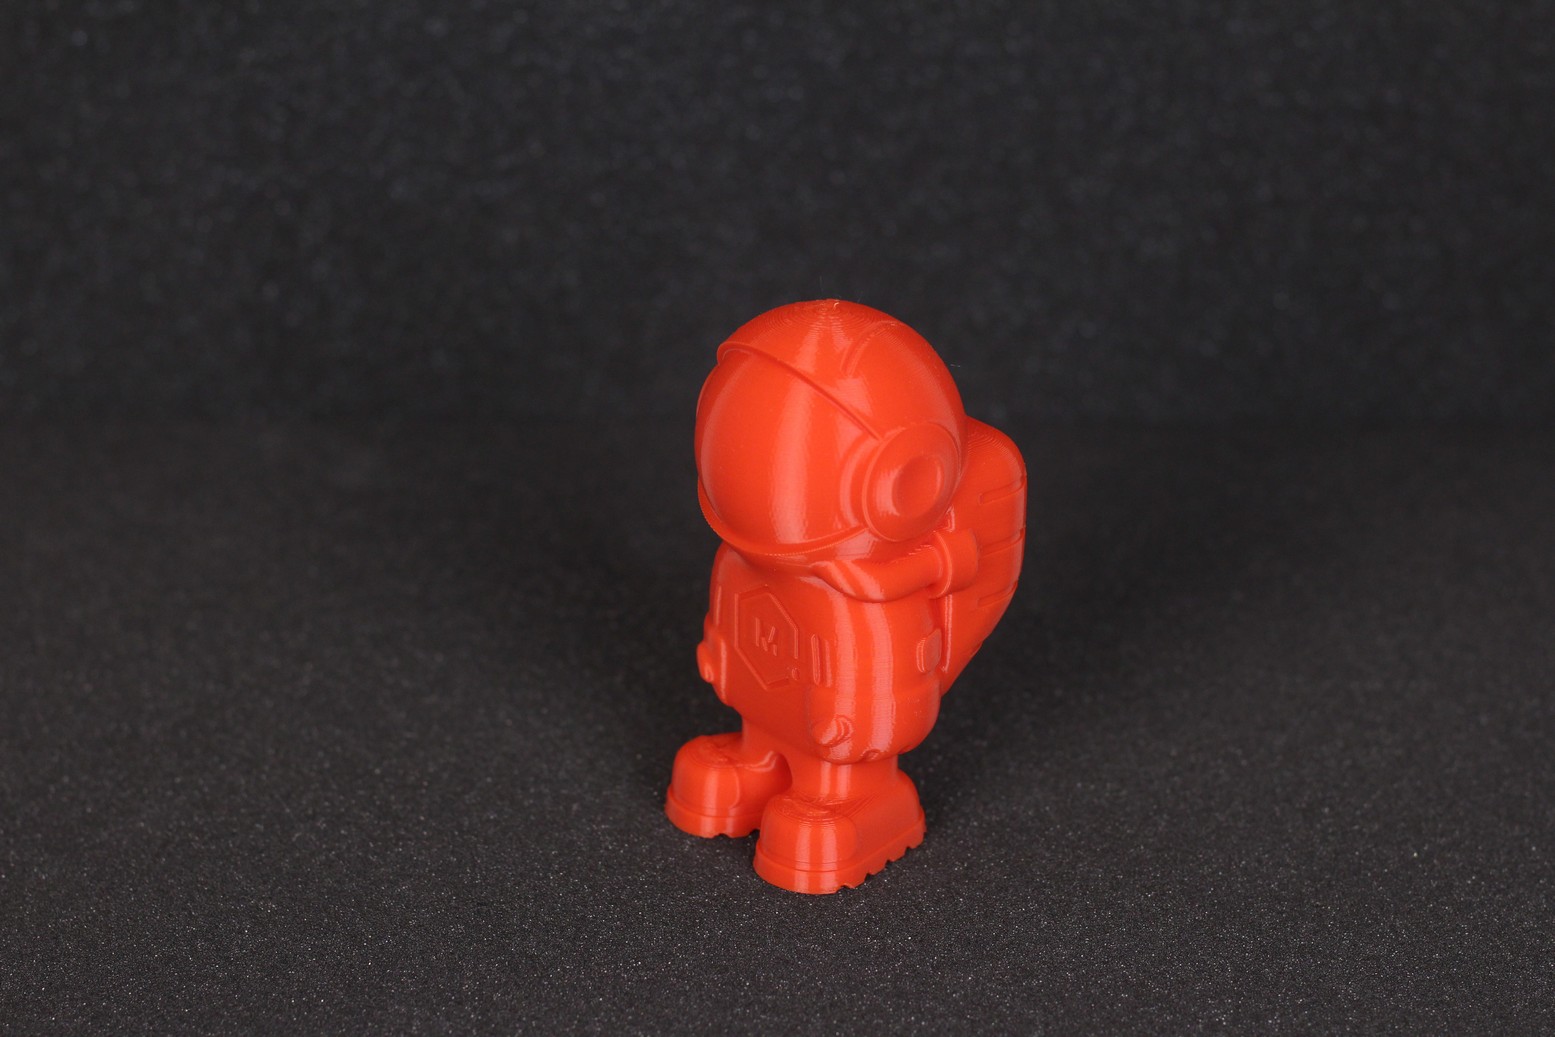 Phil A Ment printed in PLA on Creality CR 200B 3 | Creality CR-200B Review: Budget Enclosed 3D Printer